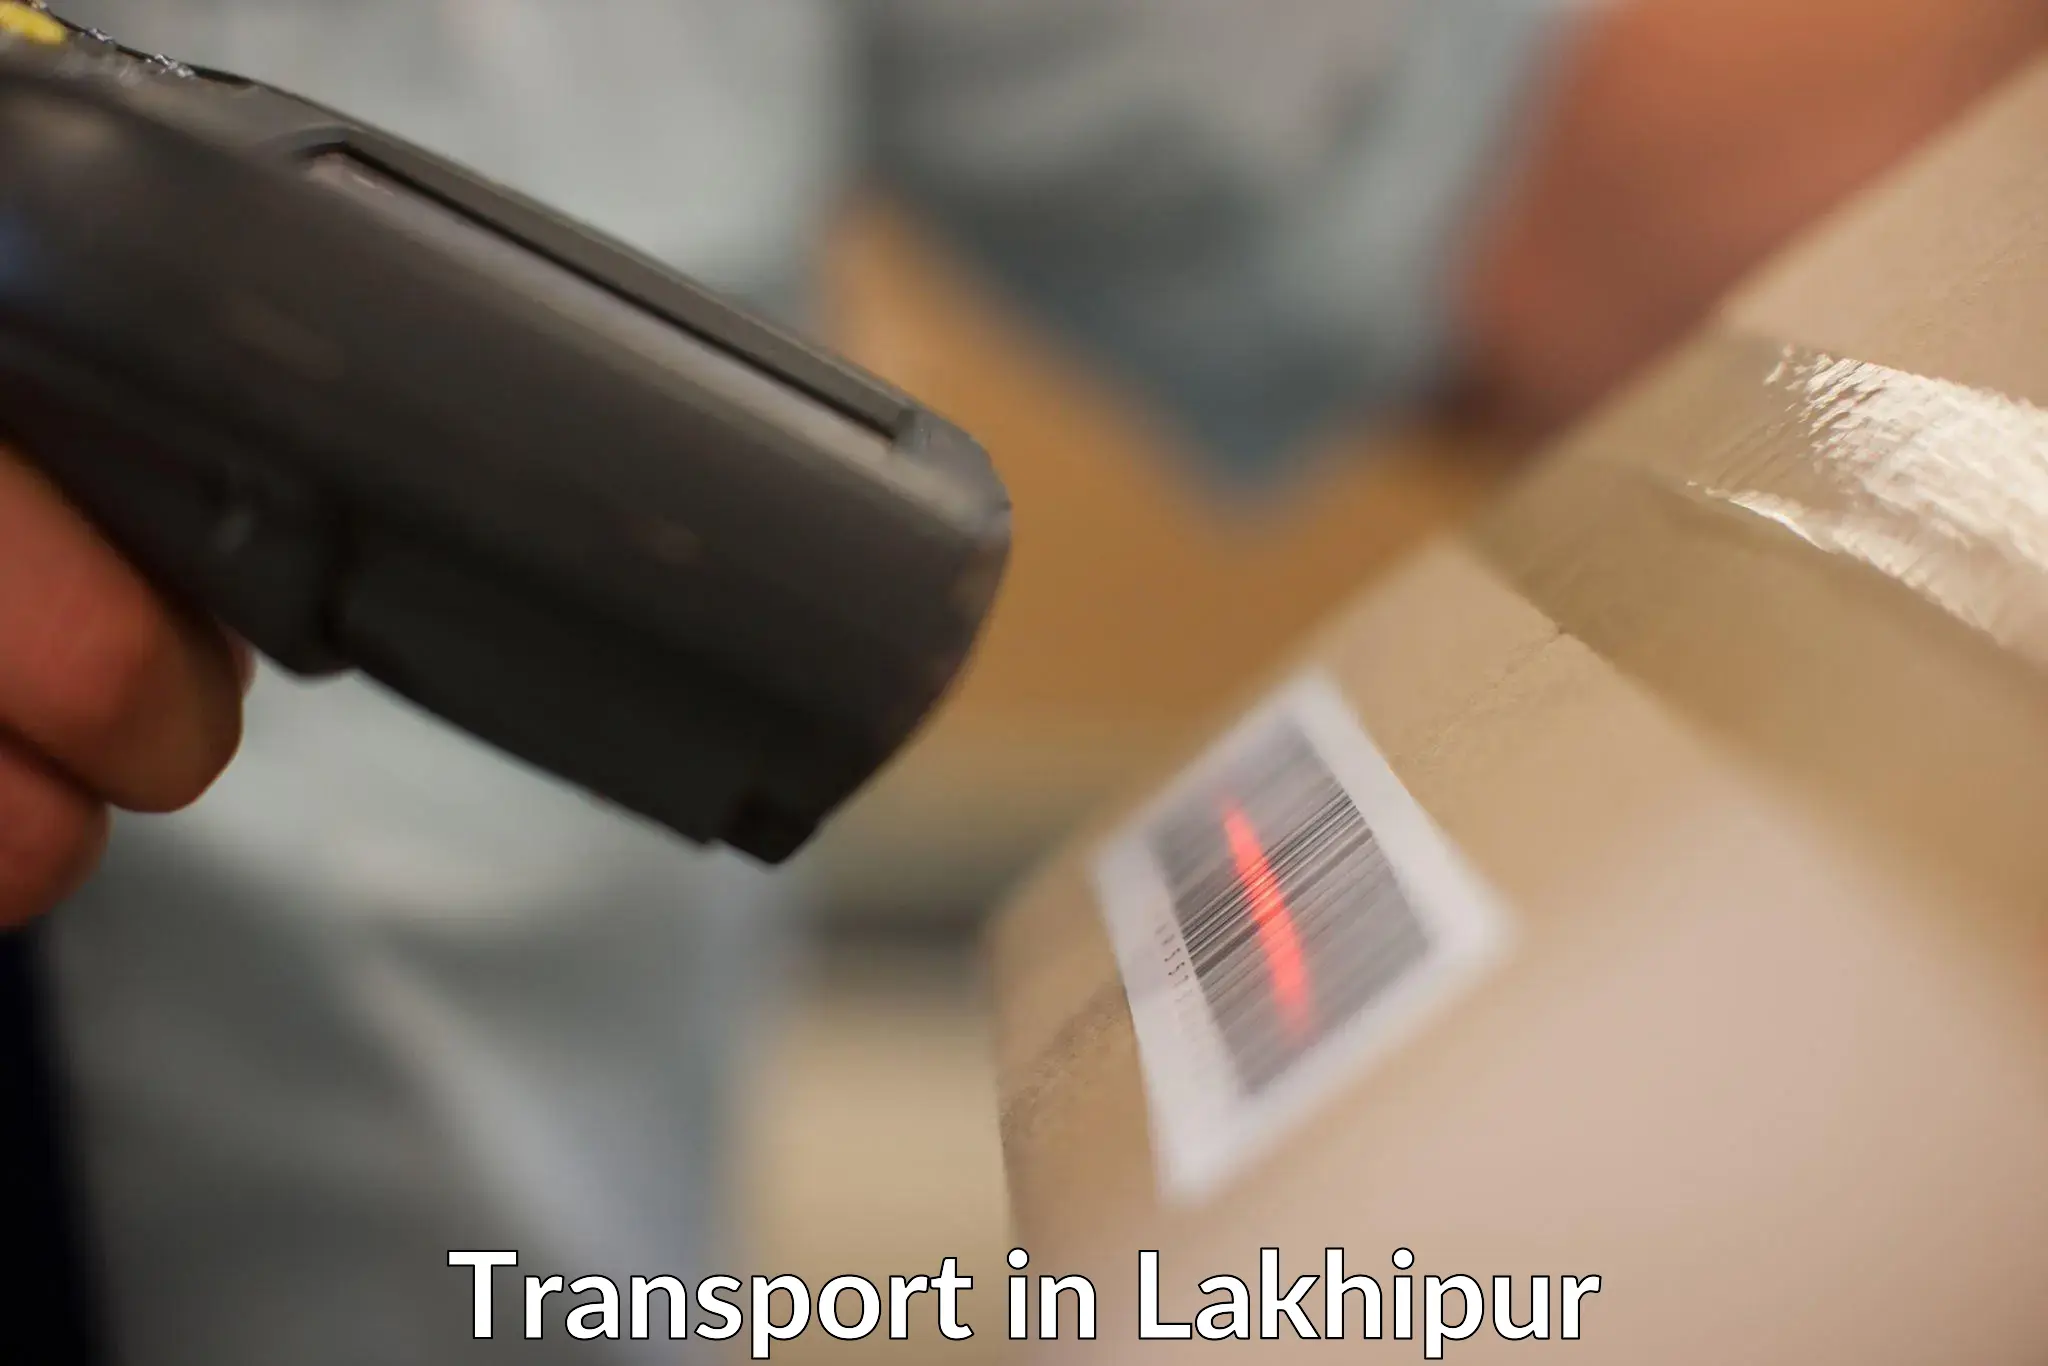 Nationwide transport services in Lakhipur